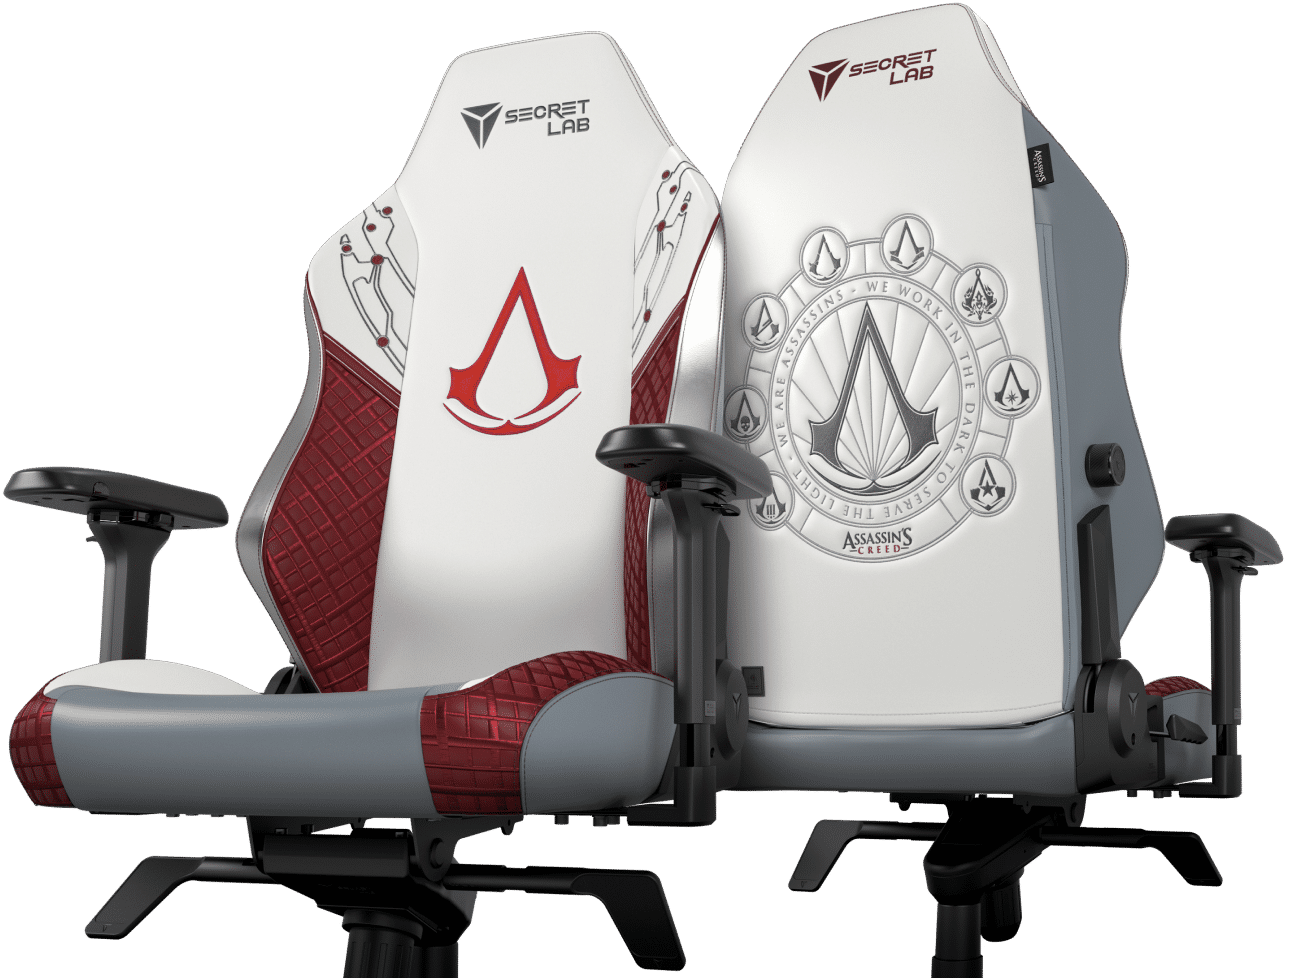 https://images.secretlab.co/theme/partnerships/assassins_creed/collab_assassins_creed_splash_chairs-2.png